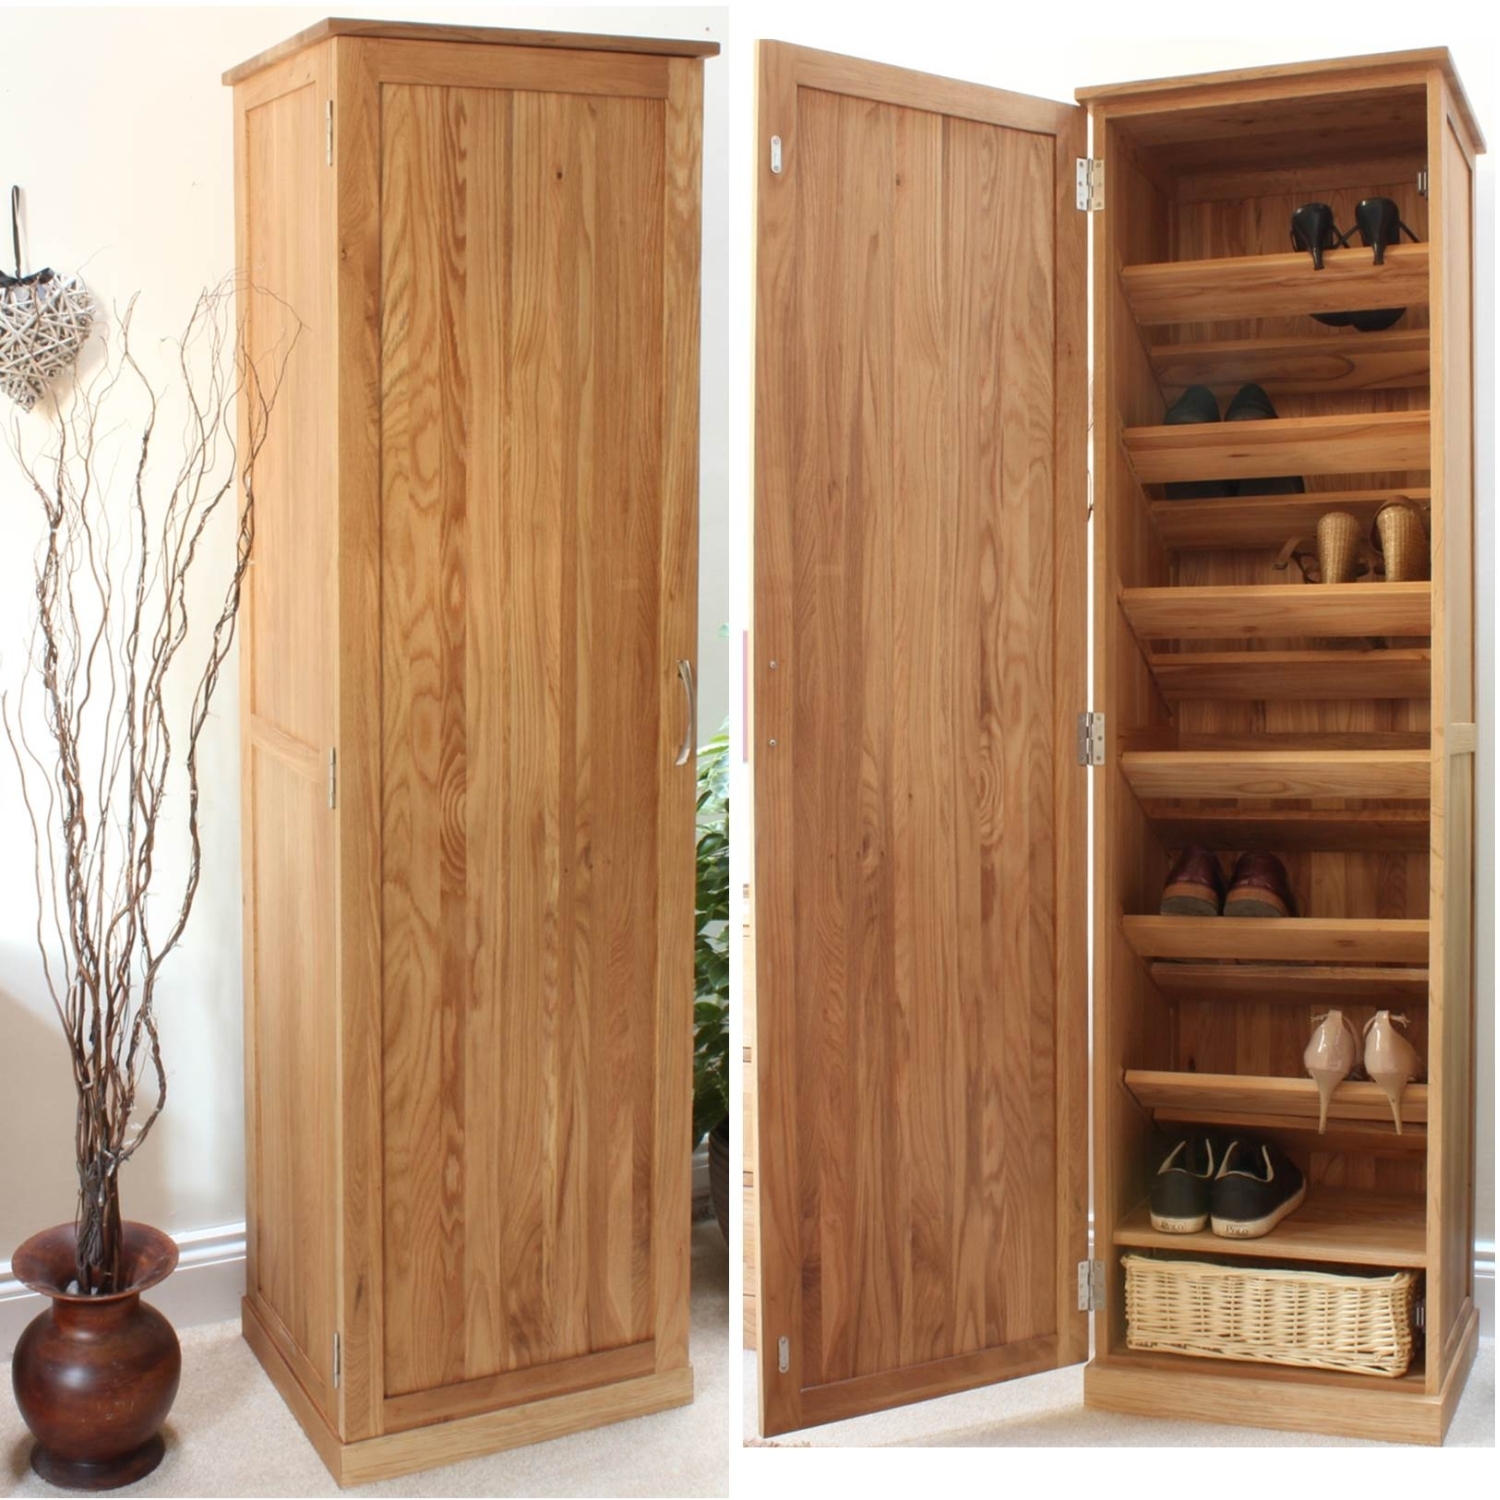 Storage Cabinets With Doors Visualhunt, Tall Thin Storage Shelves